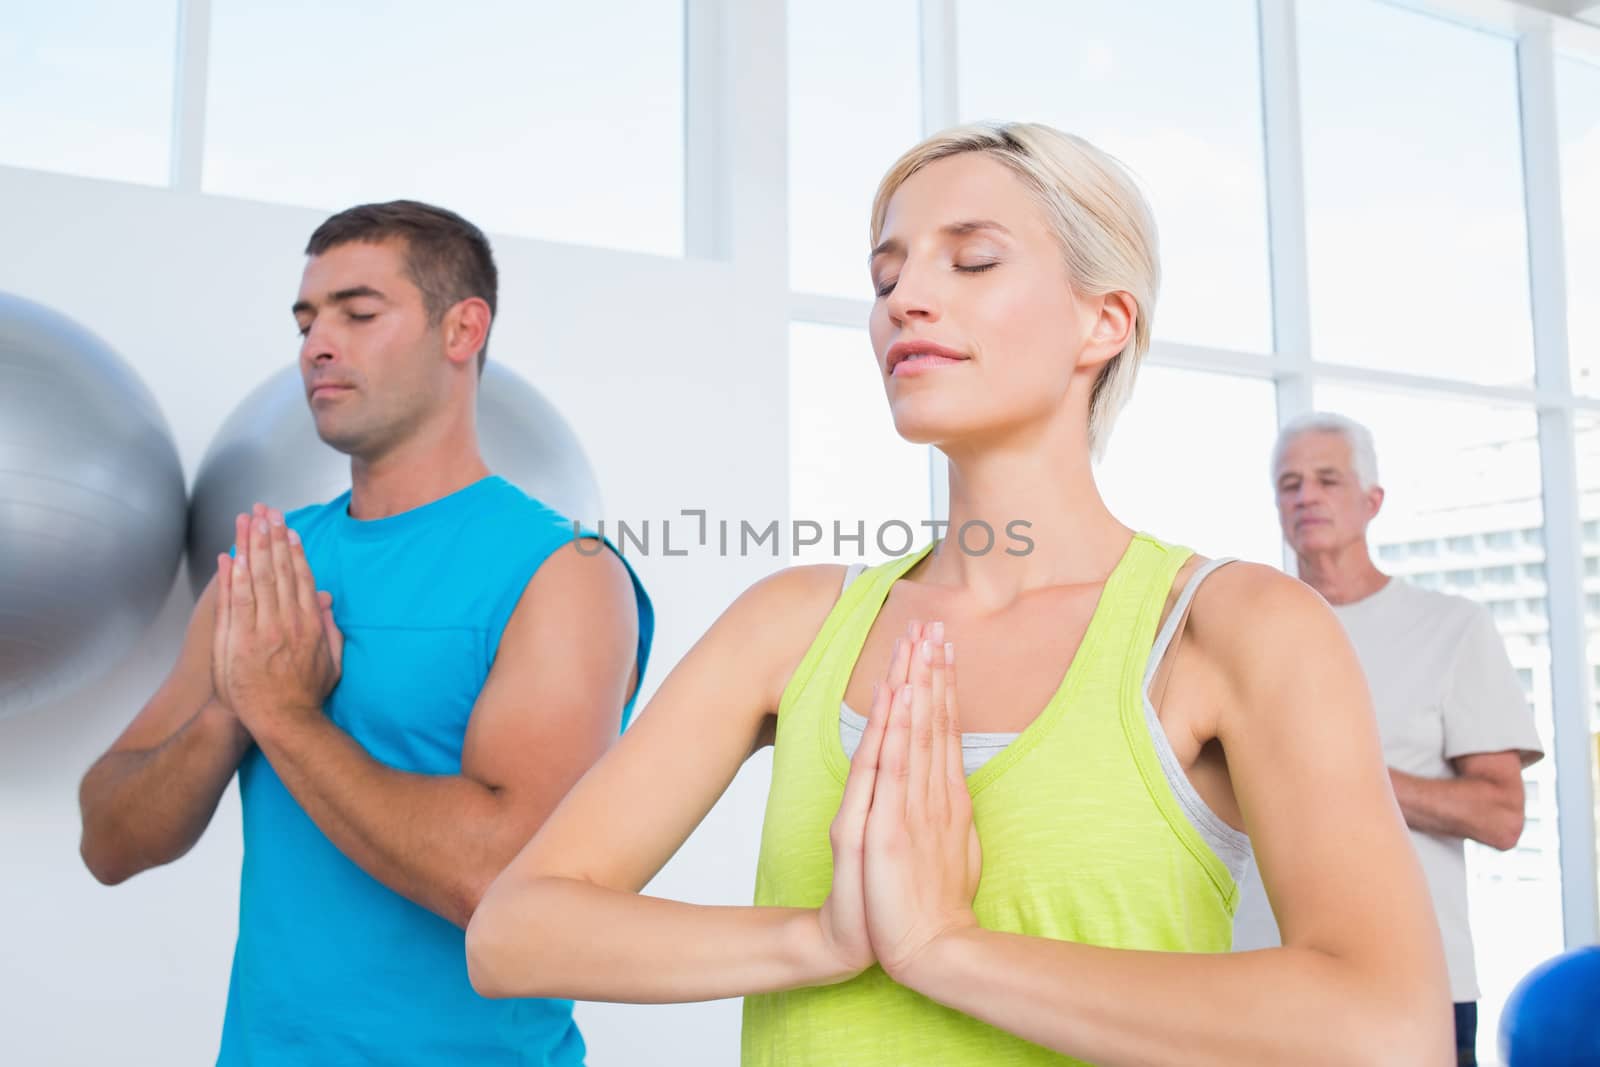 Fit people meditating with hands joined in gym class